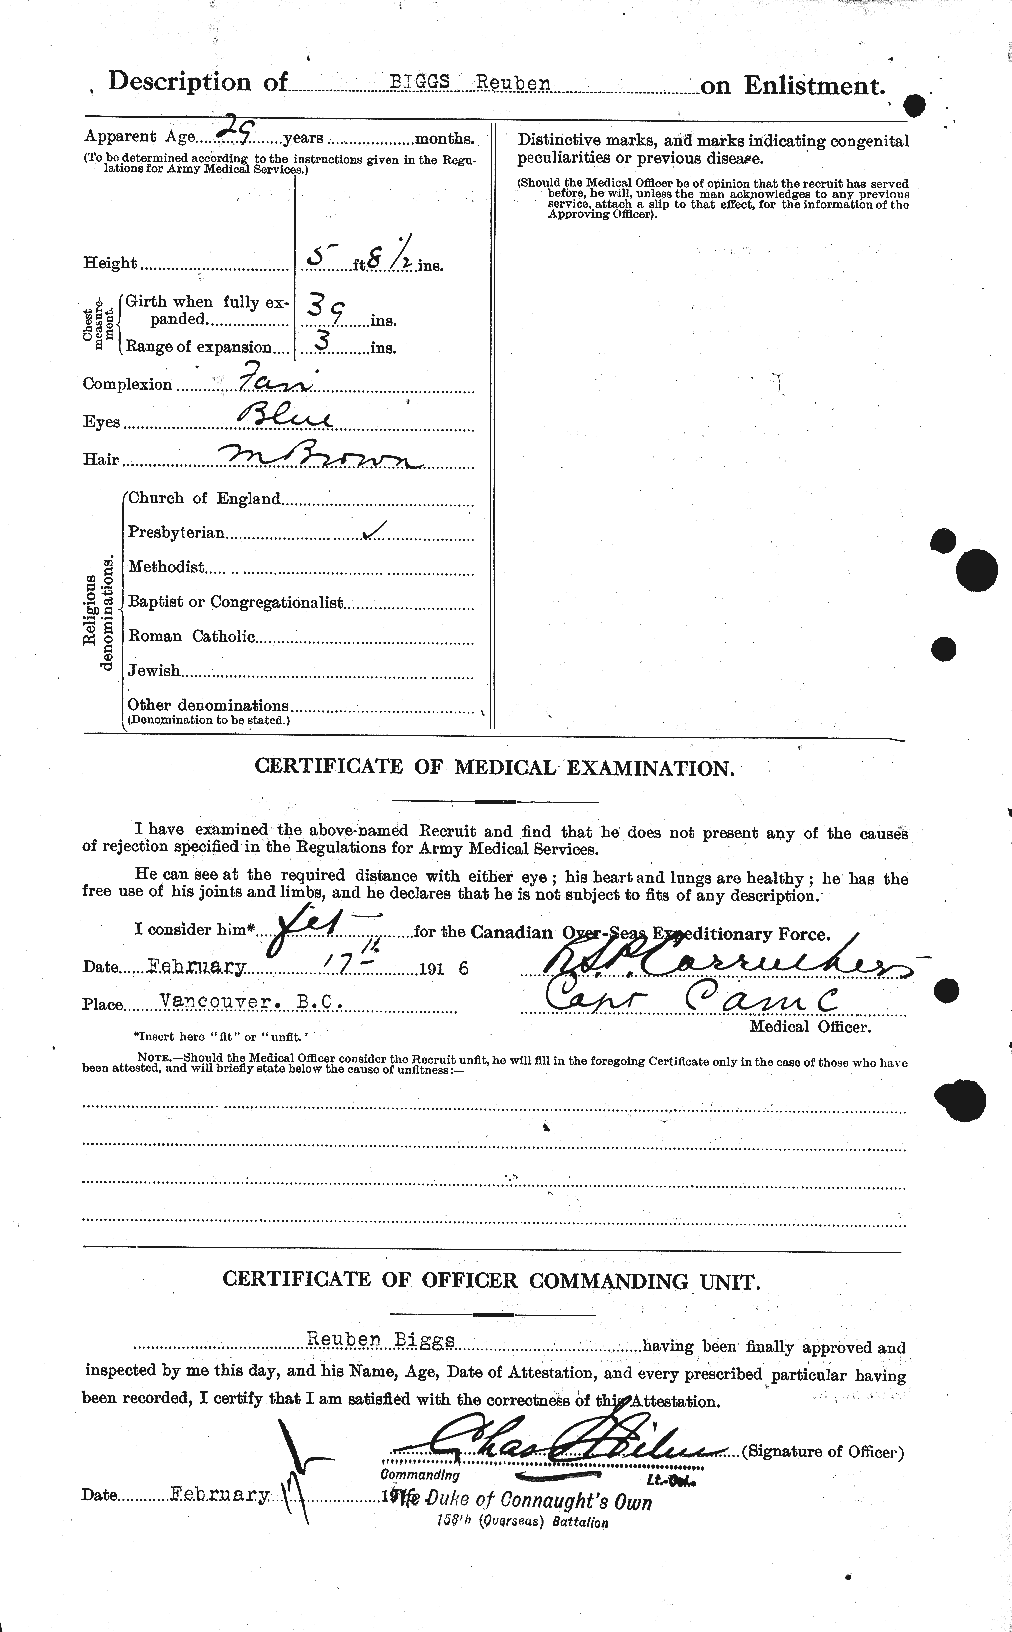 Personnel Records of the First World War - CEF 239166b